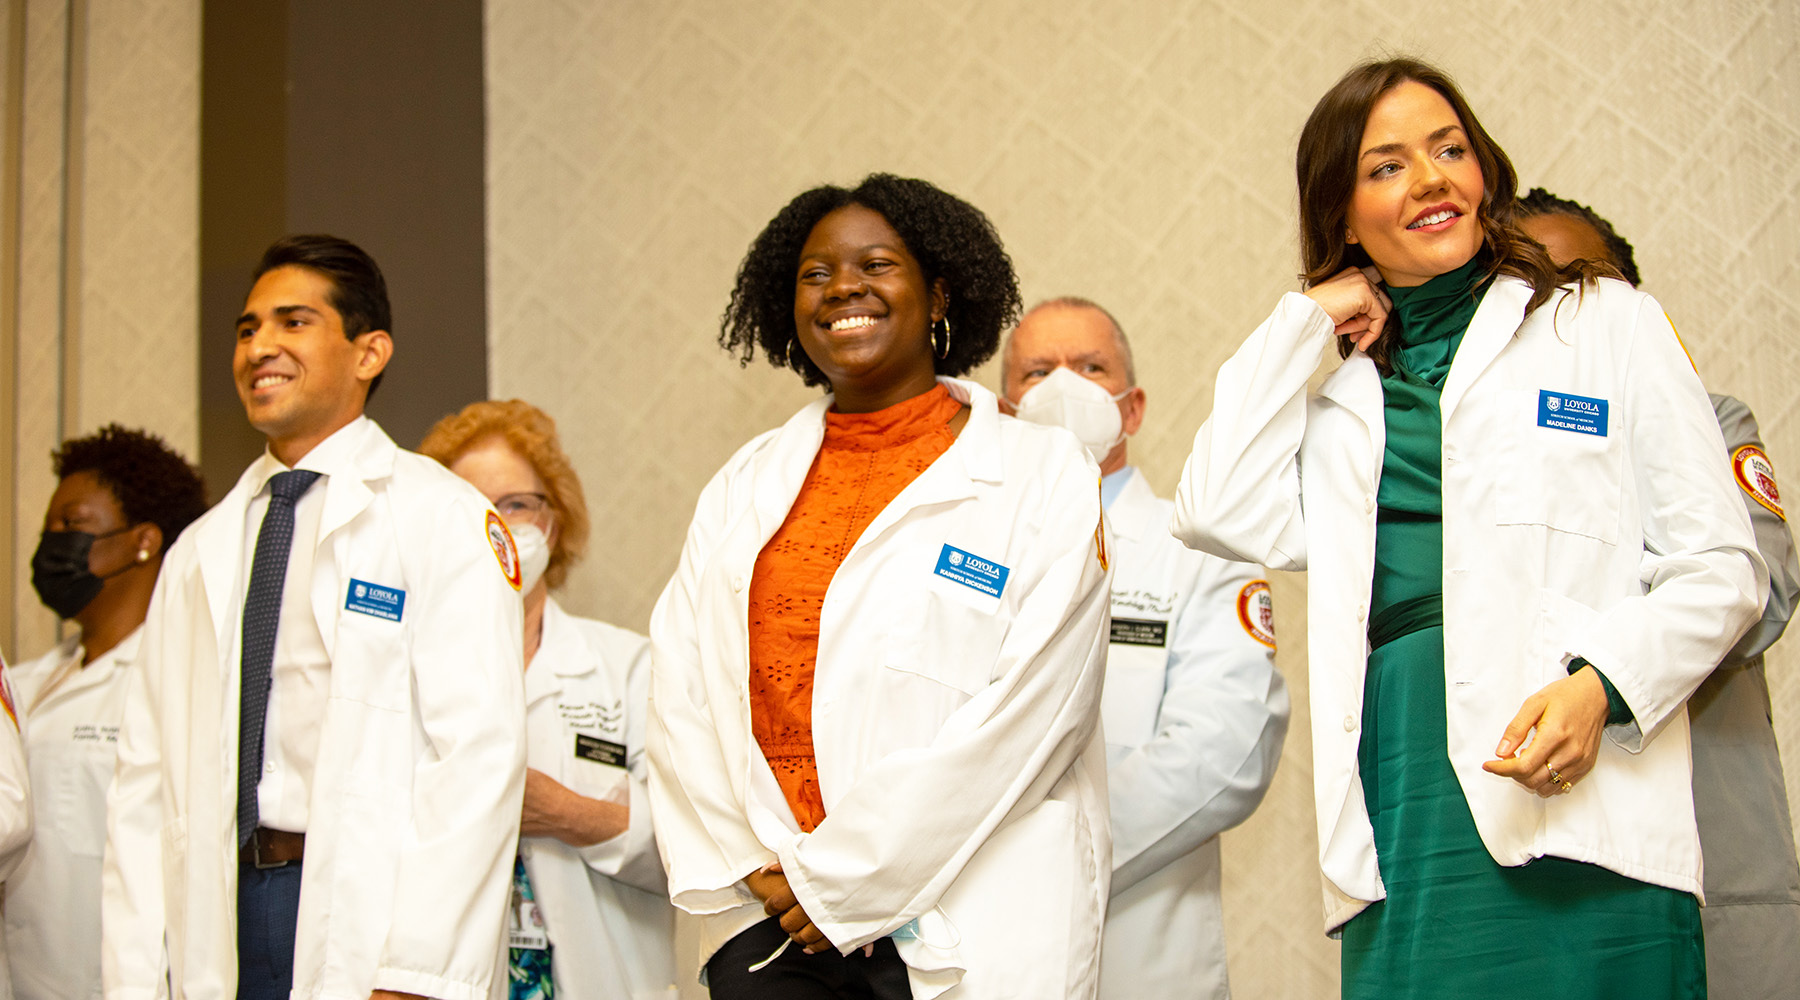 Class of 2026 dons their white coats